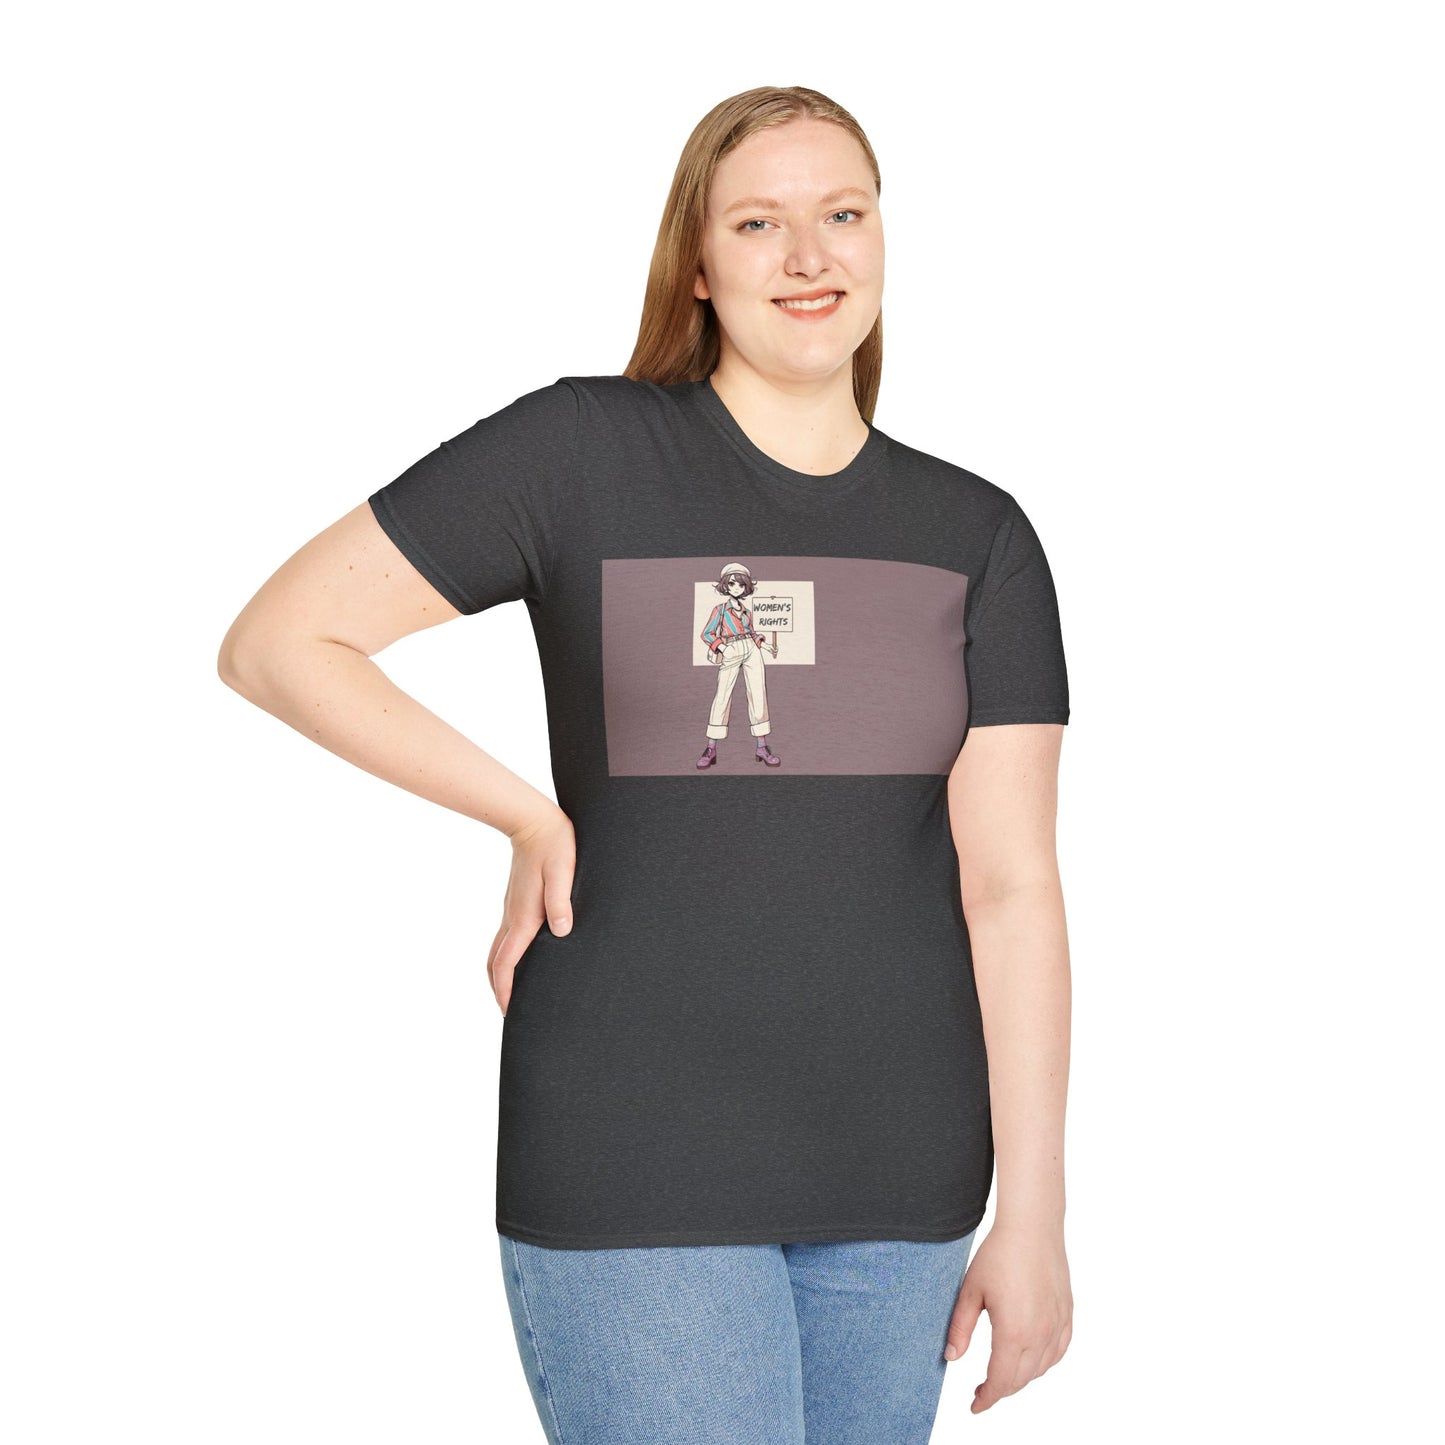 Women's Rights! Bold Uncompromising Statement Soft Style t-shirt |unisex| Chic Activism, Protest Oppression, Demand Equality!